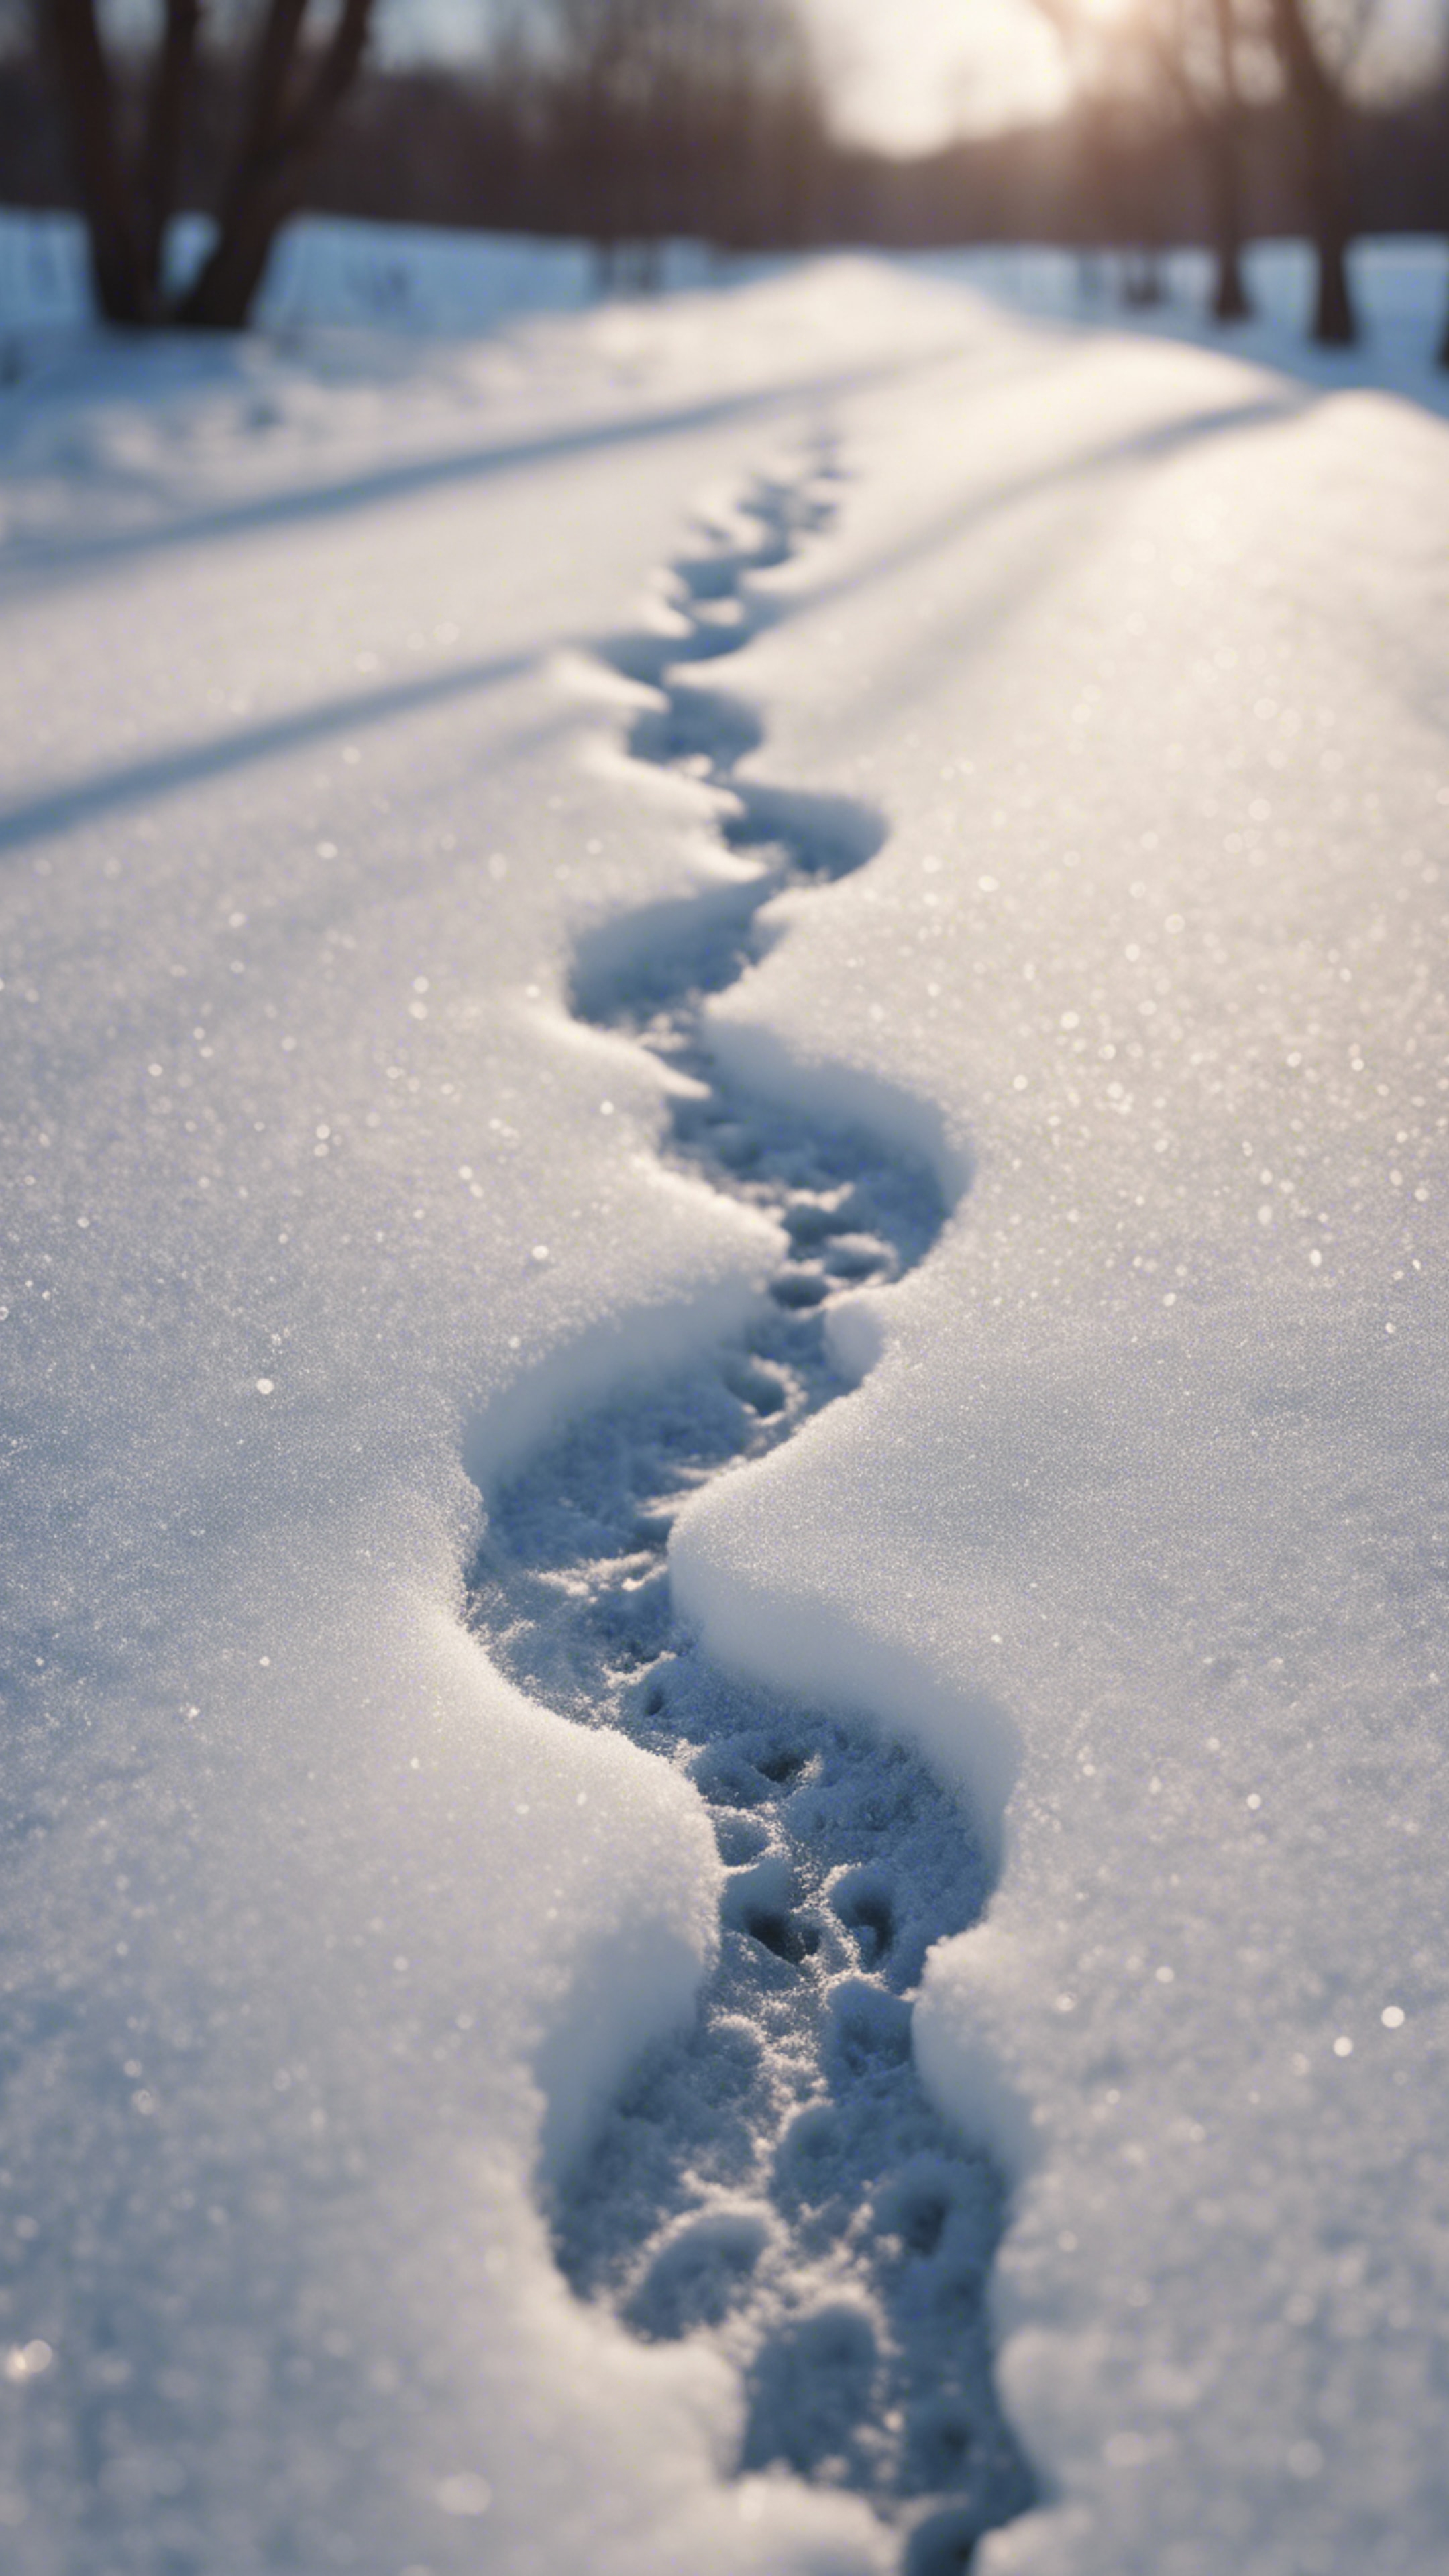 A pair of frosty, heart-shaped footprints imprinted on a snow-covered lane, symbolizing love in winter. Tapet[a9223da6c59742c6a00f]